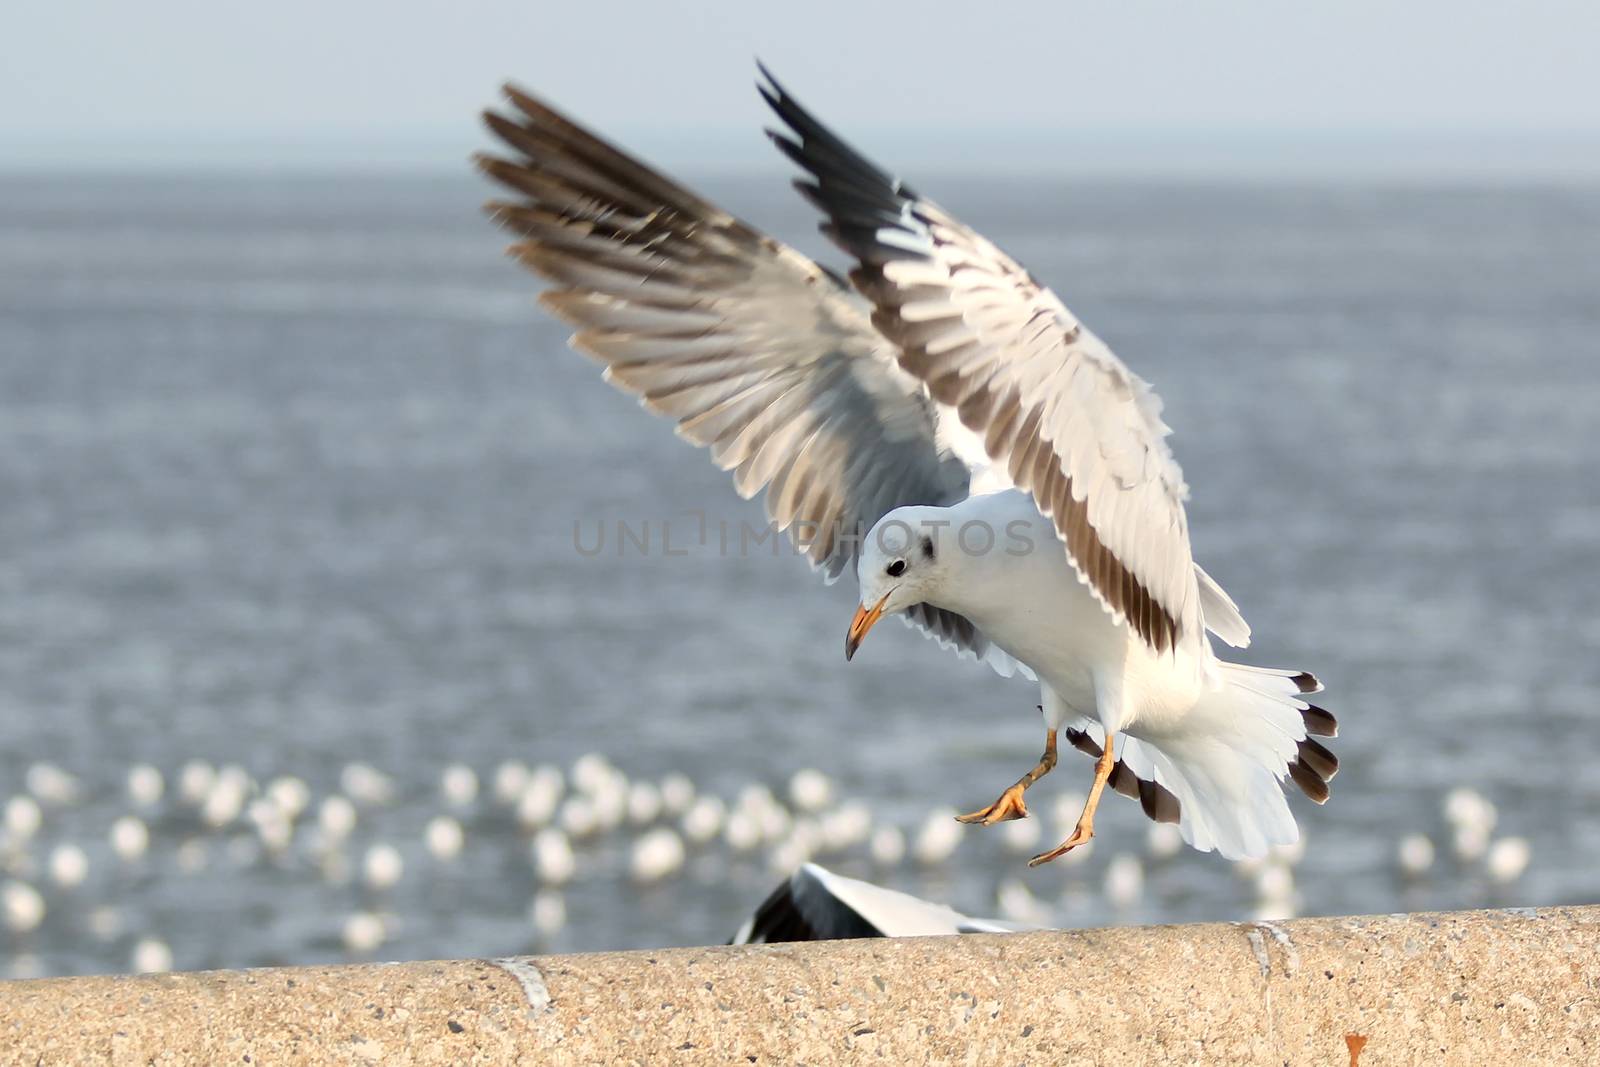 Seagull landing on the ground